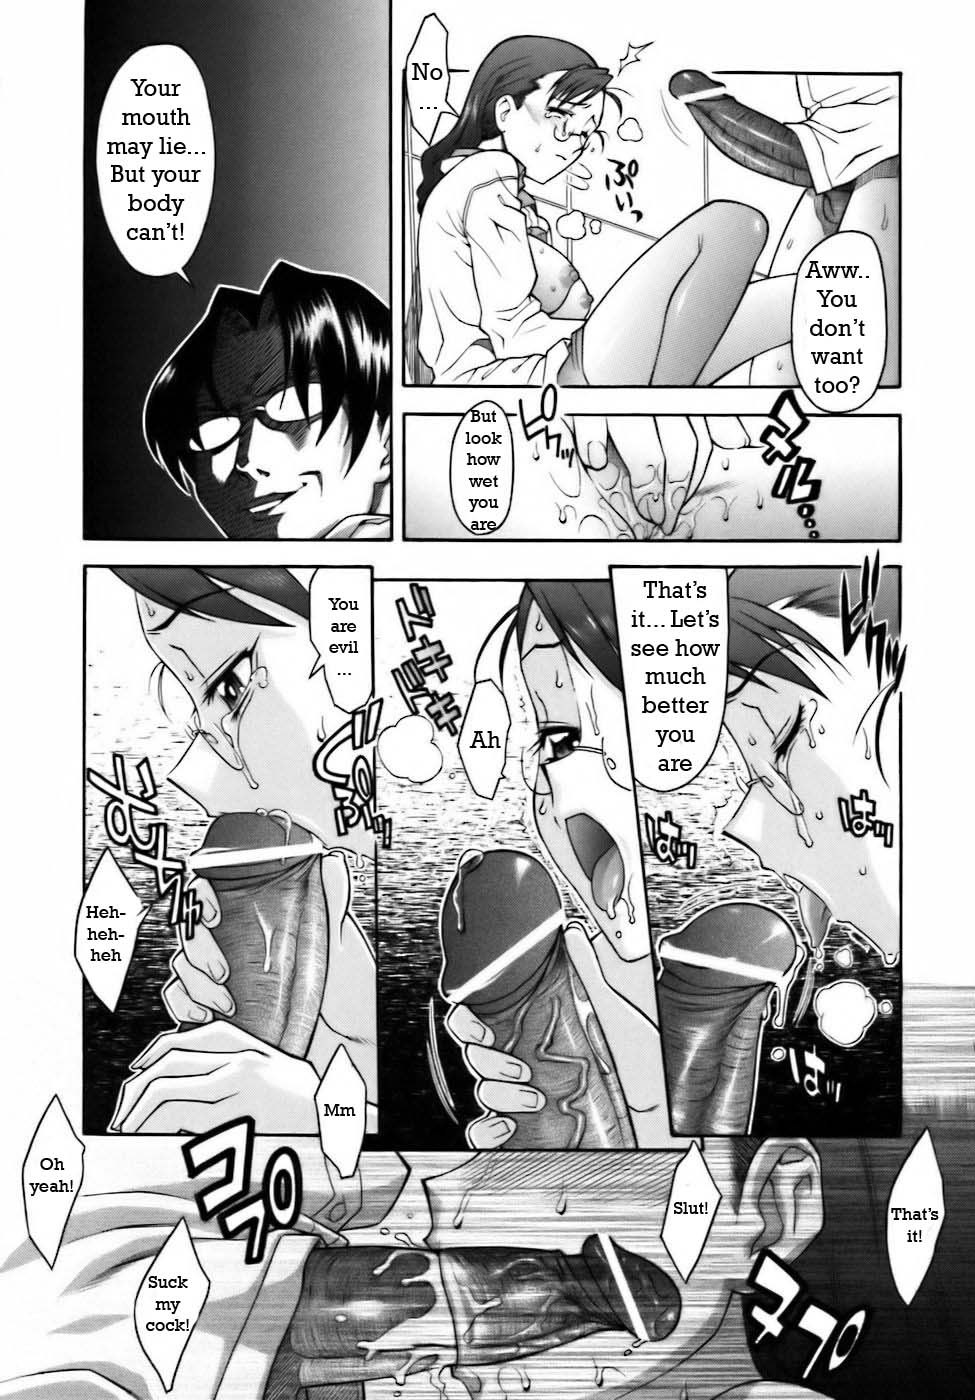 Time Master Two by Shinkai     Part 2 of 2        Part 1 Sad there isn’t